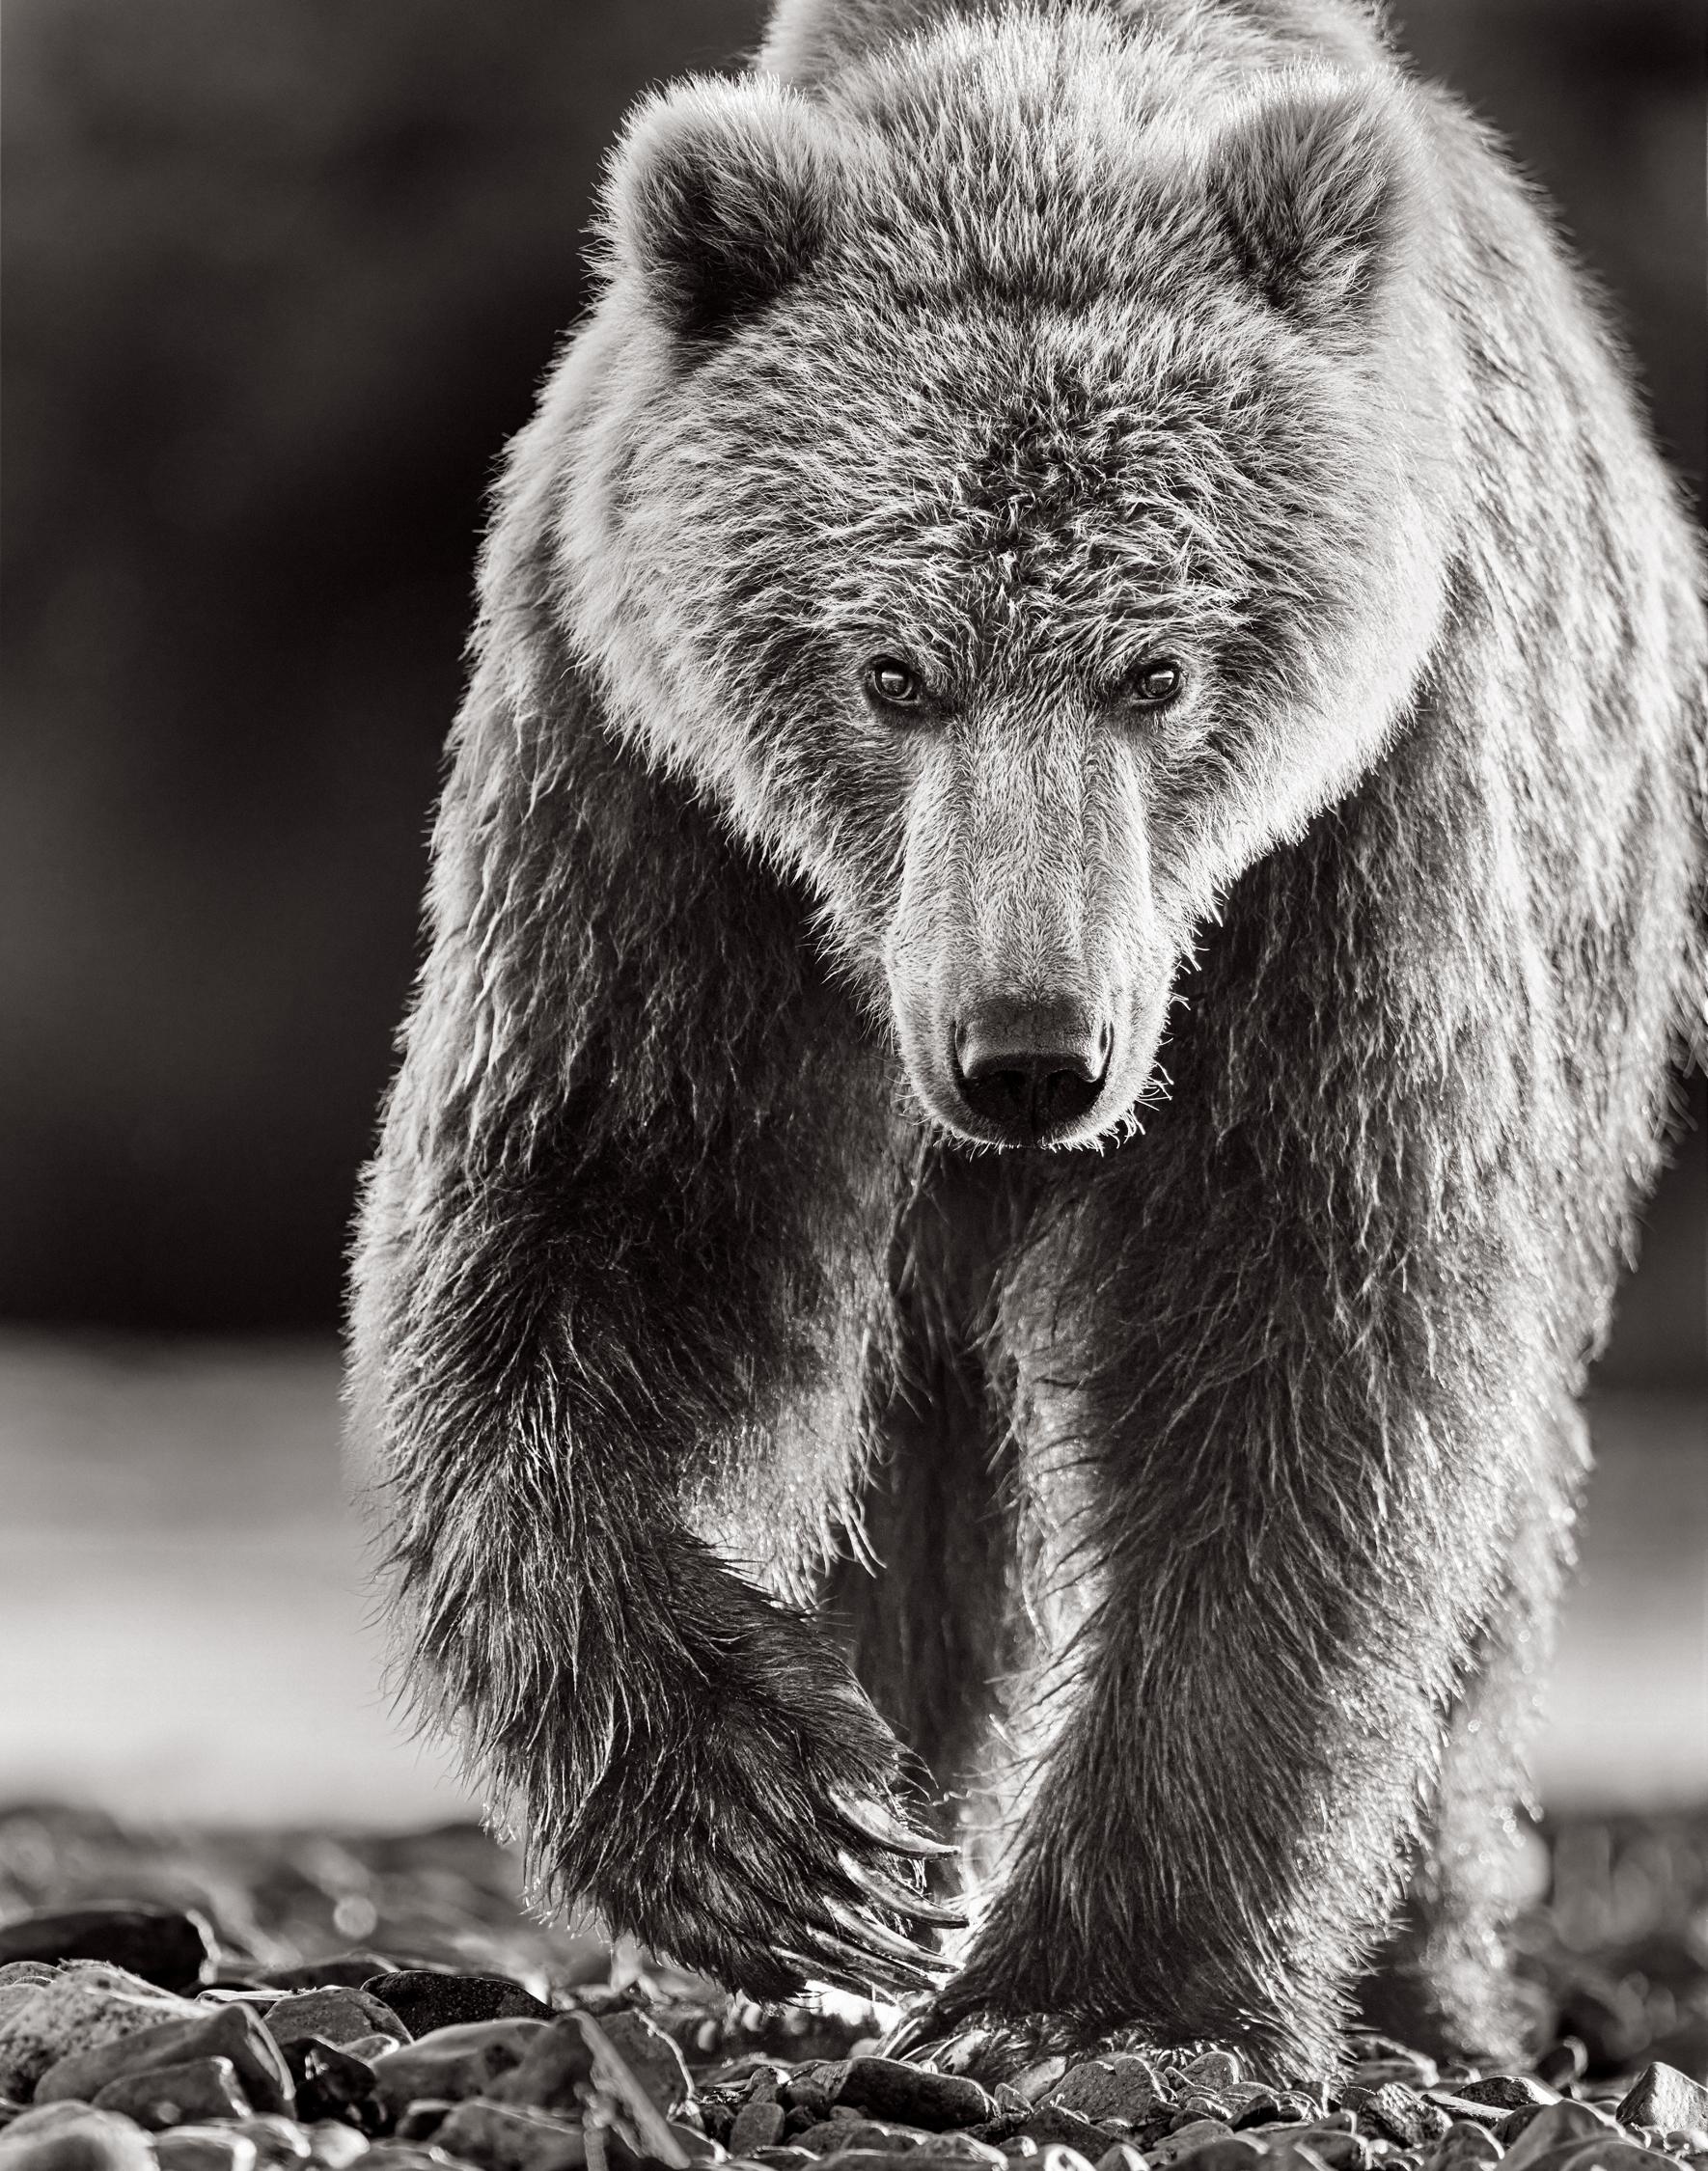 Drew Doggett Black and White Photograph - Intimate Portrait Of A Brown Bear Walking Towards The Camera